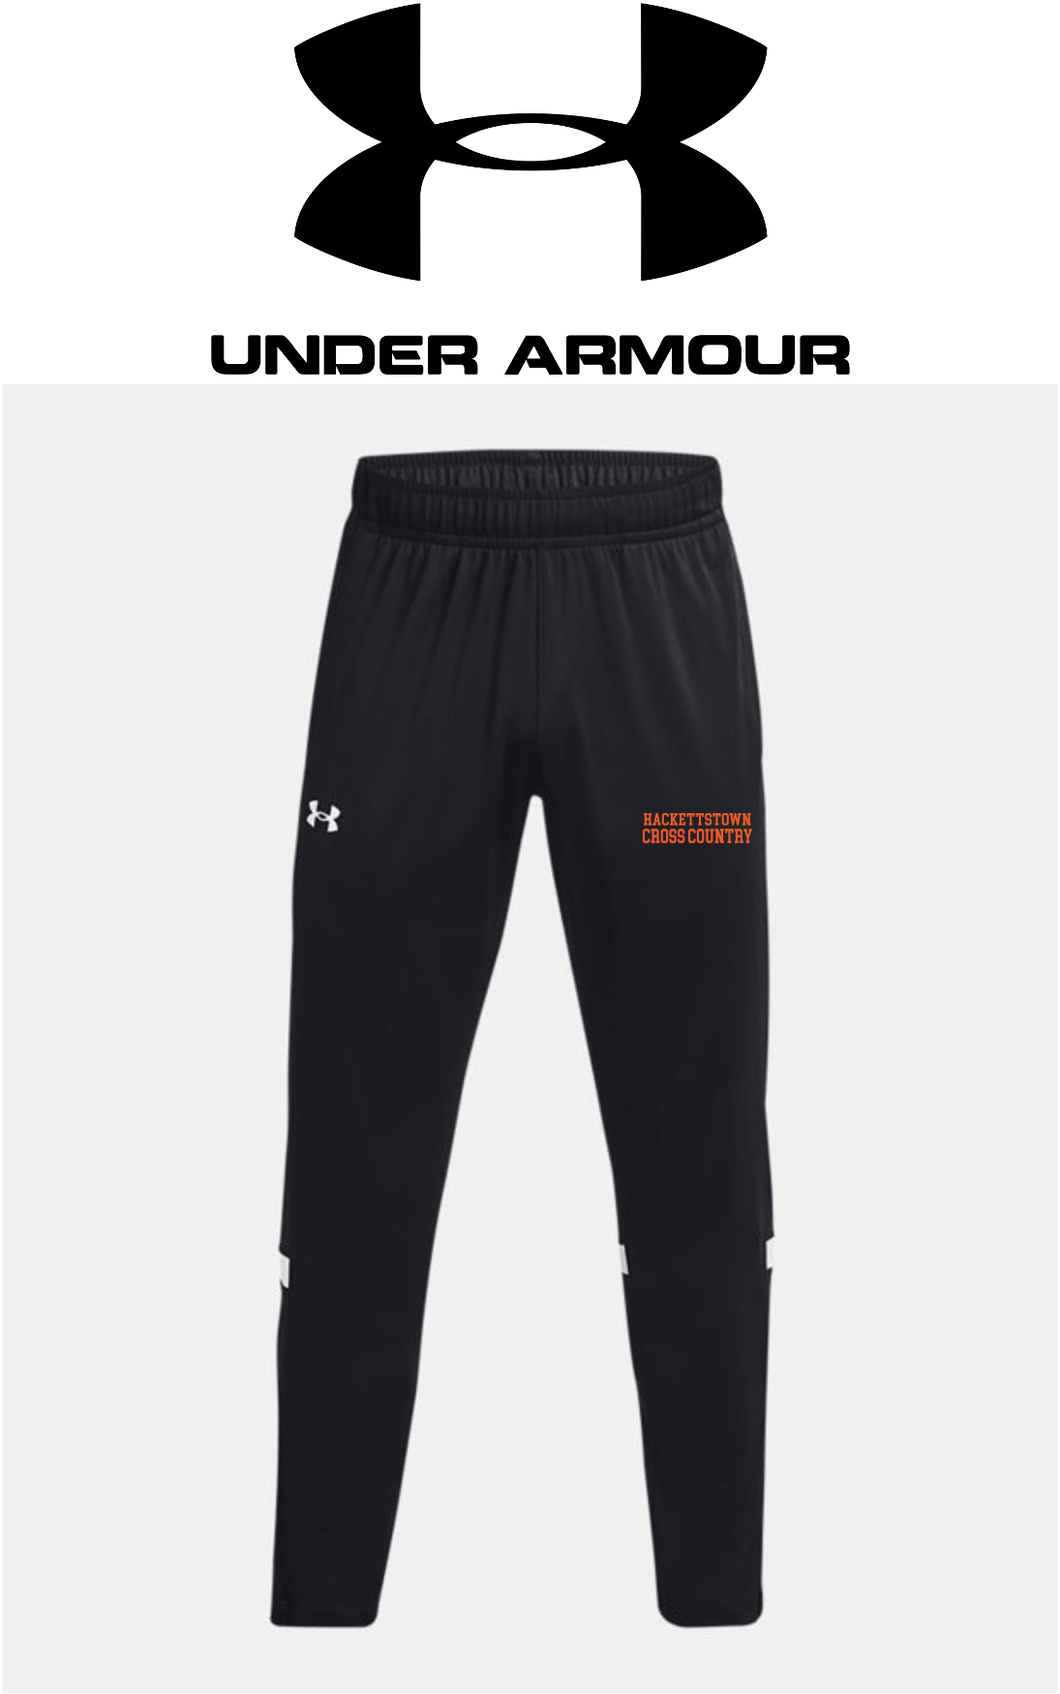 *UA M's Team Knit WUp Pant - Hackettstown XC